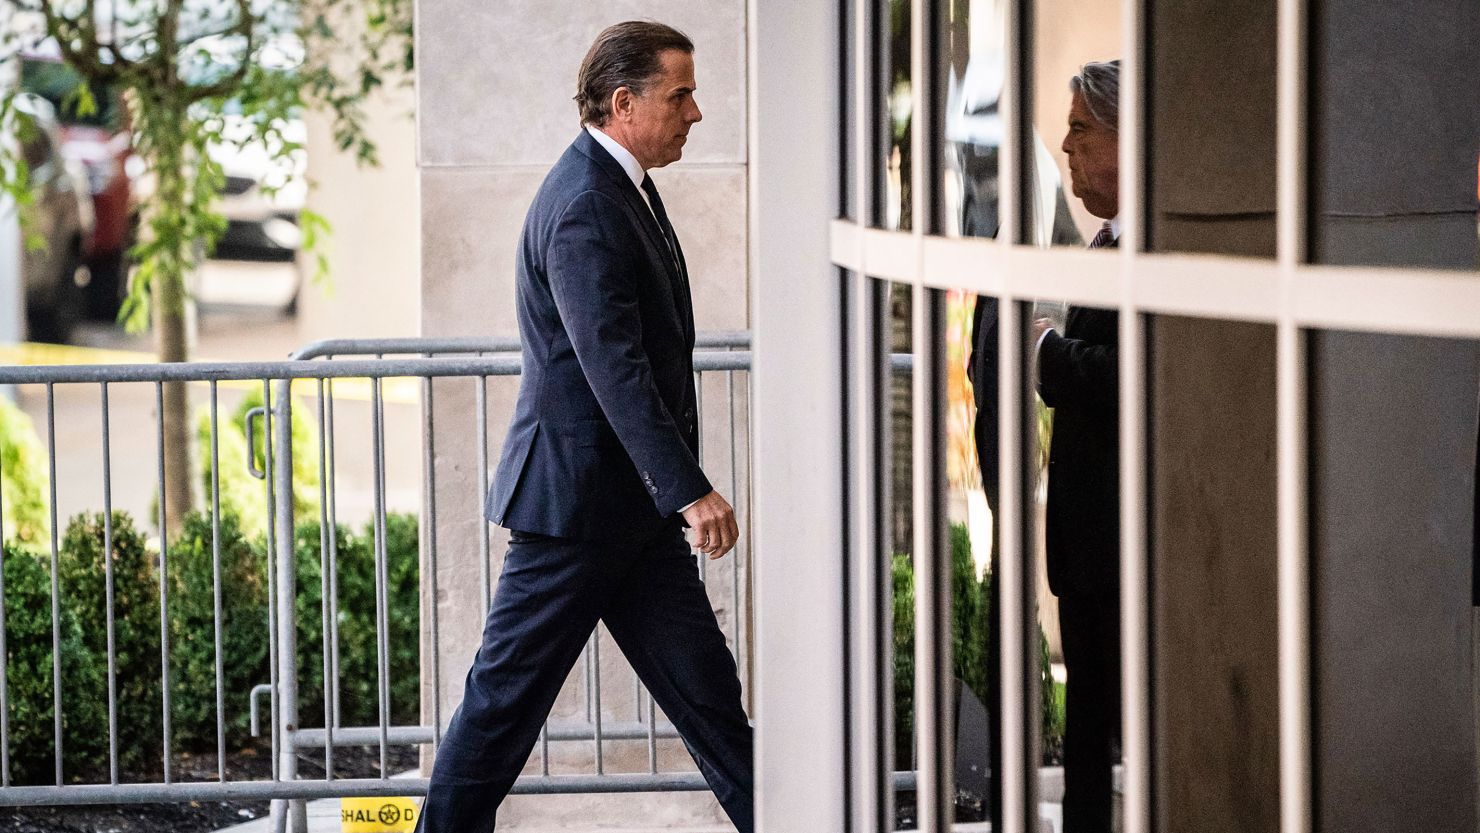 Hunter Biden arrives for a court appearance at the J. Caleb Boggs Federal Building on Wednesday, July 26, 2023, in Wilmington, DE. 